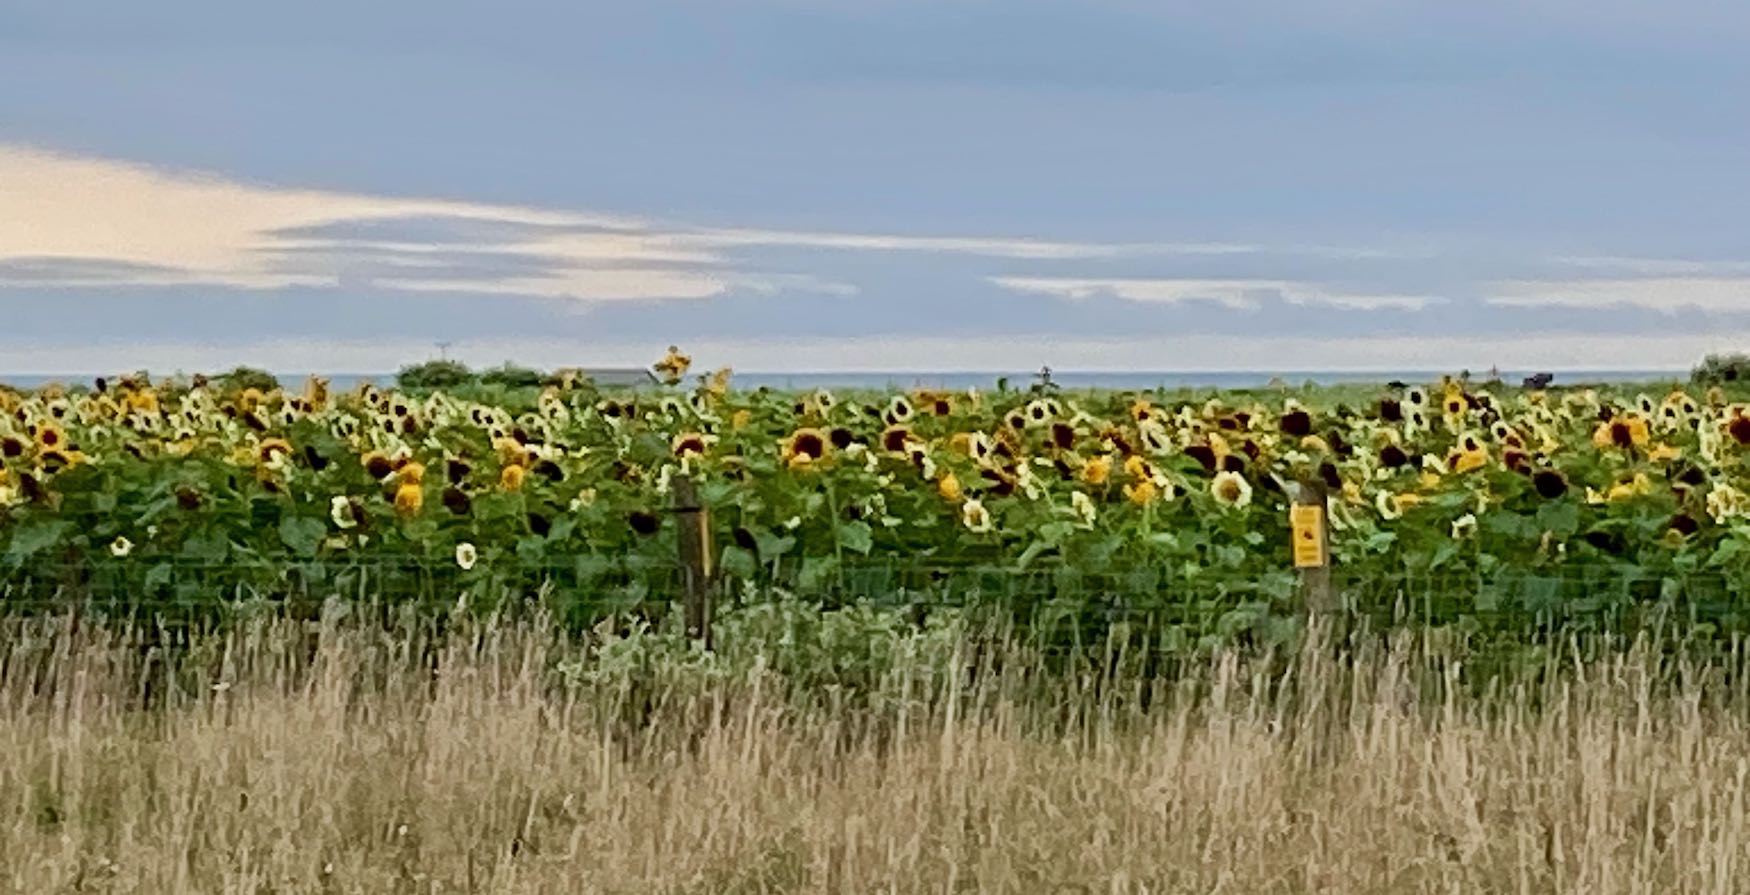 It's the weekend! Number 306, A Field of Sunflowers at Katama Farm in Edgartown, MA